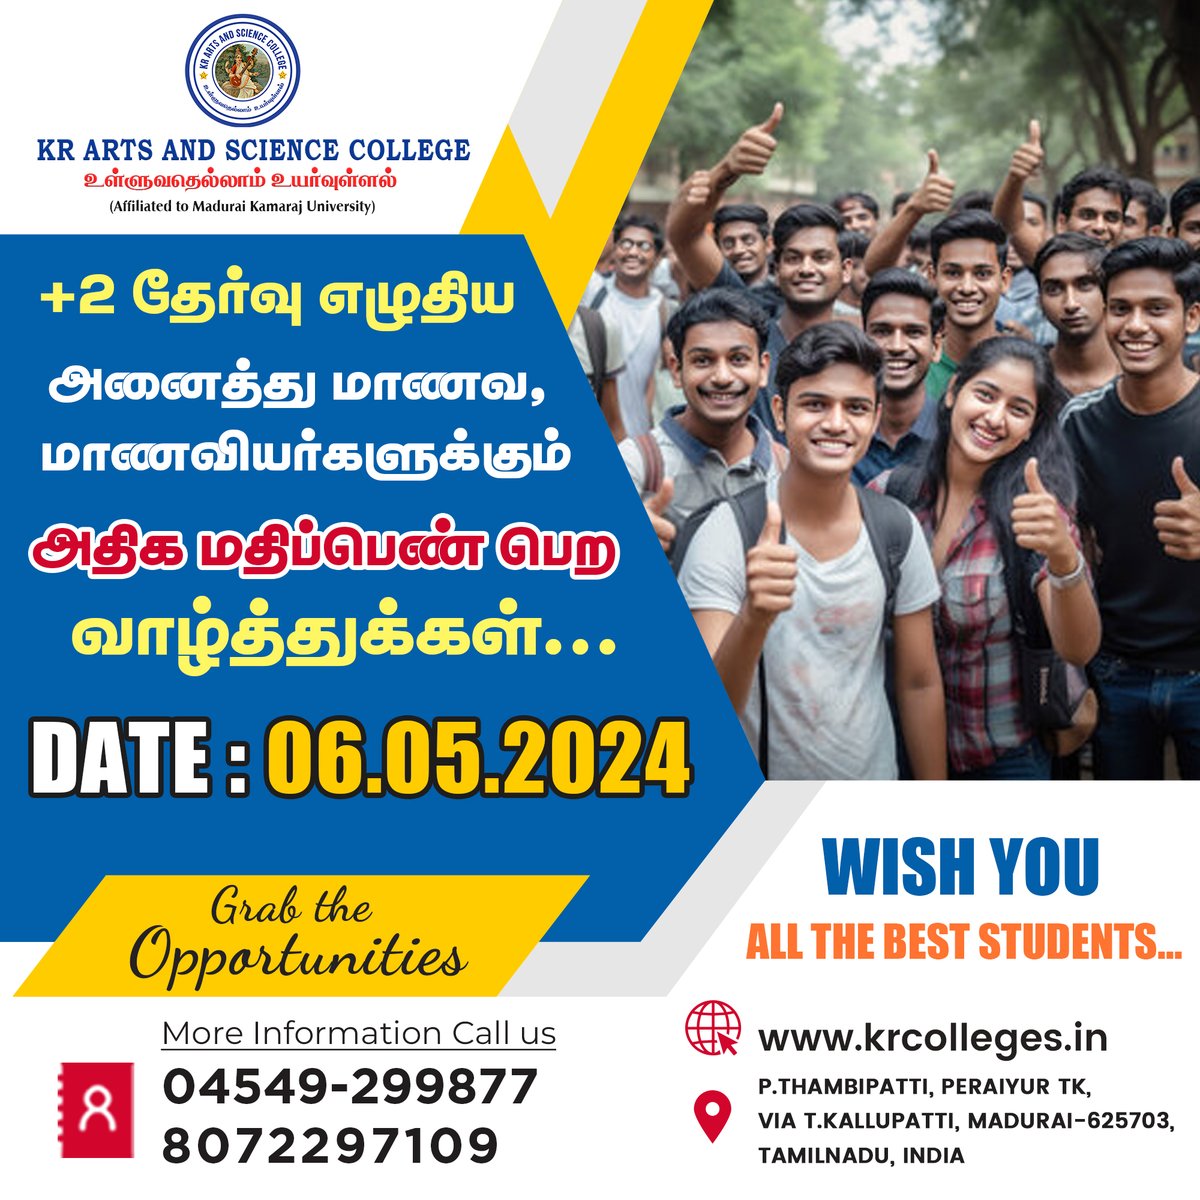 Wish You All The Best Students - KR Arts & Science College - Madurai
#madurai #education #library #campus #transportfacility #communicationskill #ecofriendlyenvironment #tamil #english #bcom #ca #bsc #computerscience #Physicaleducation #courses #admission #homescience #courses #v